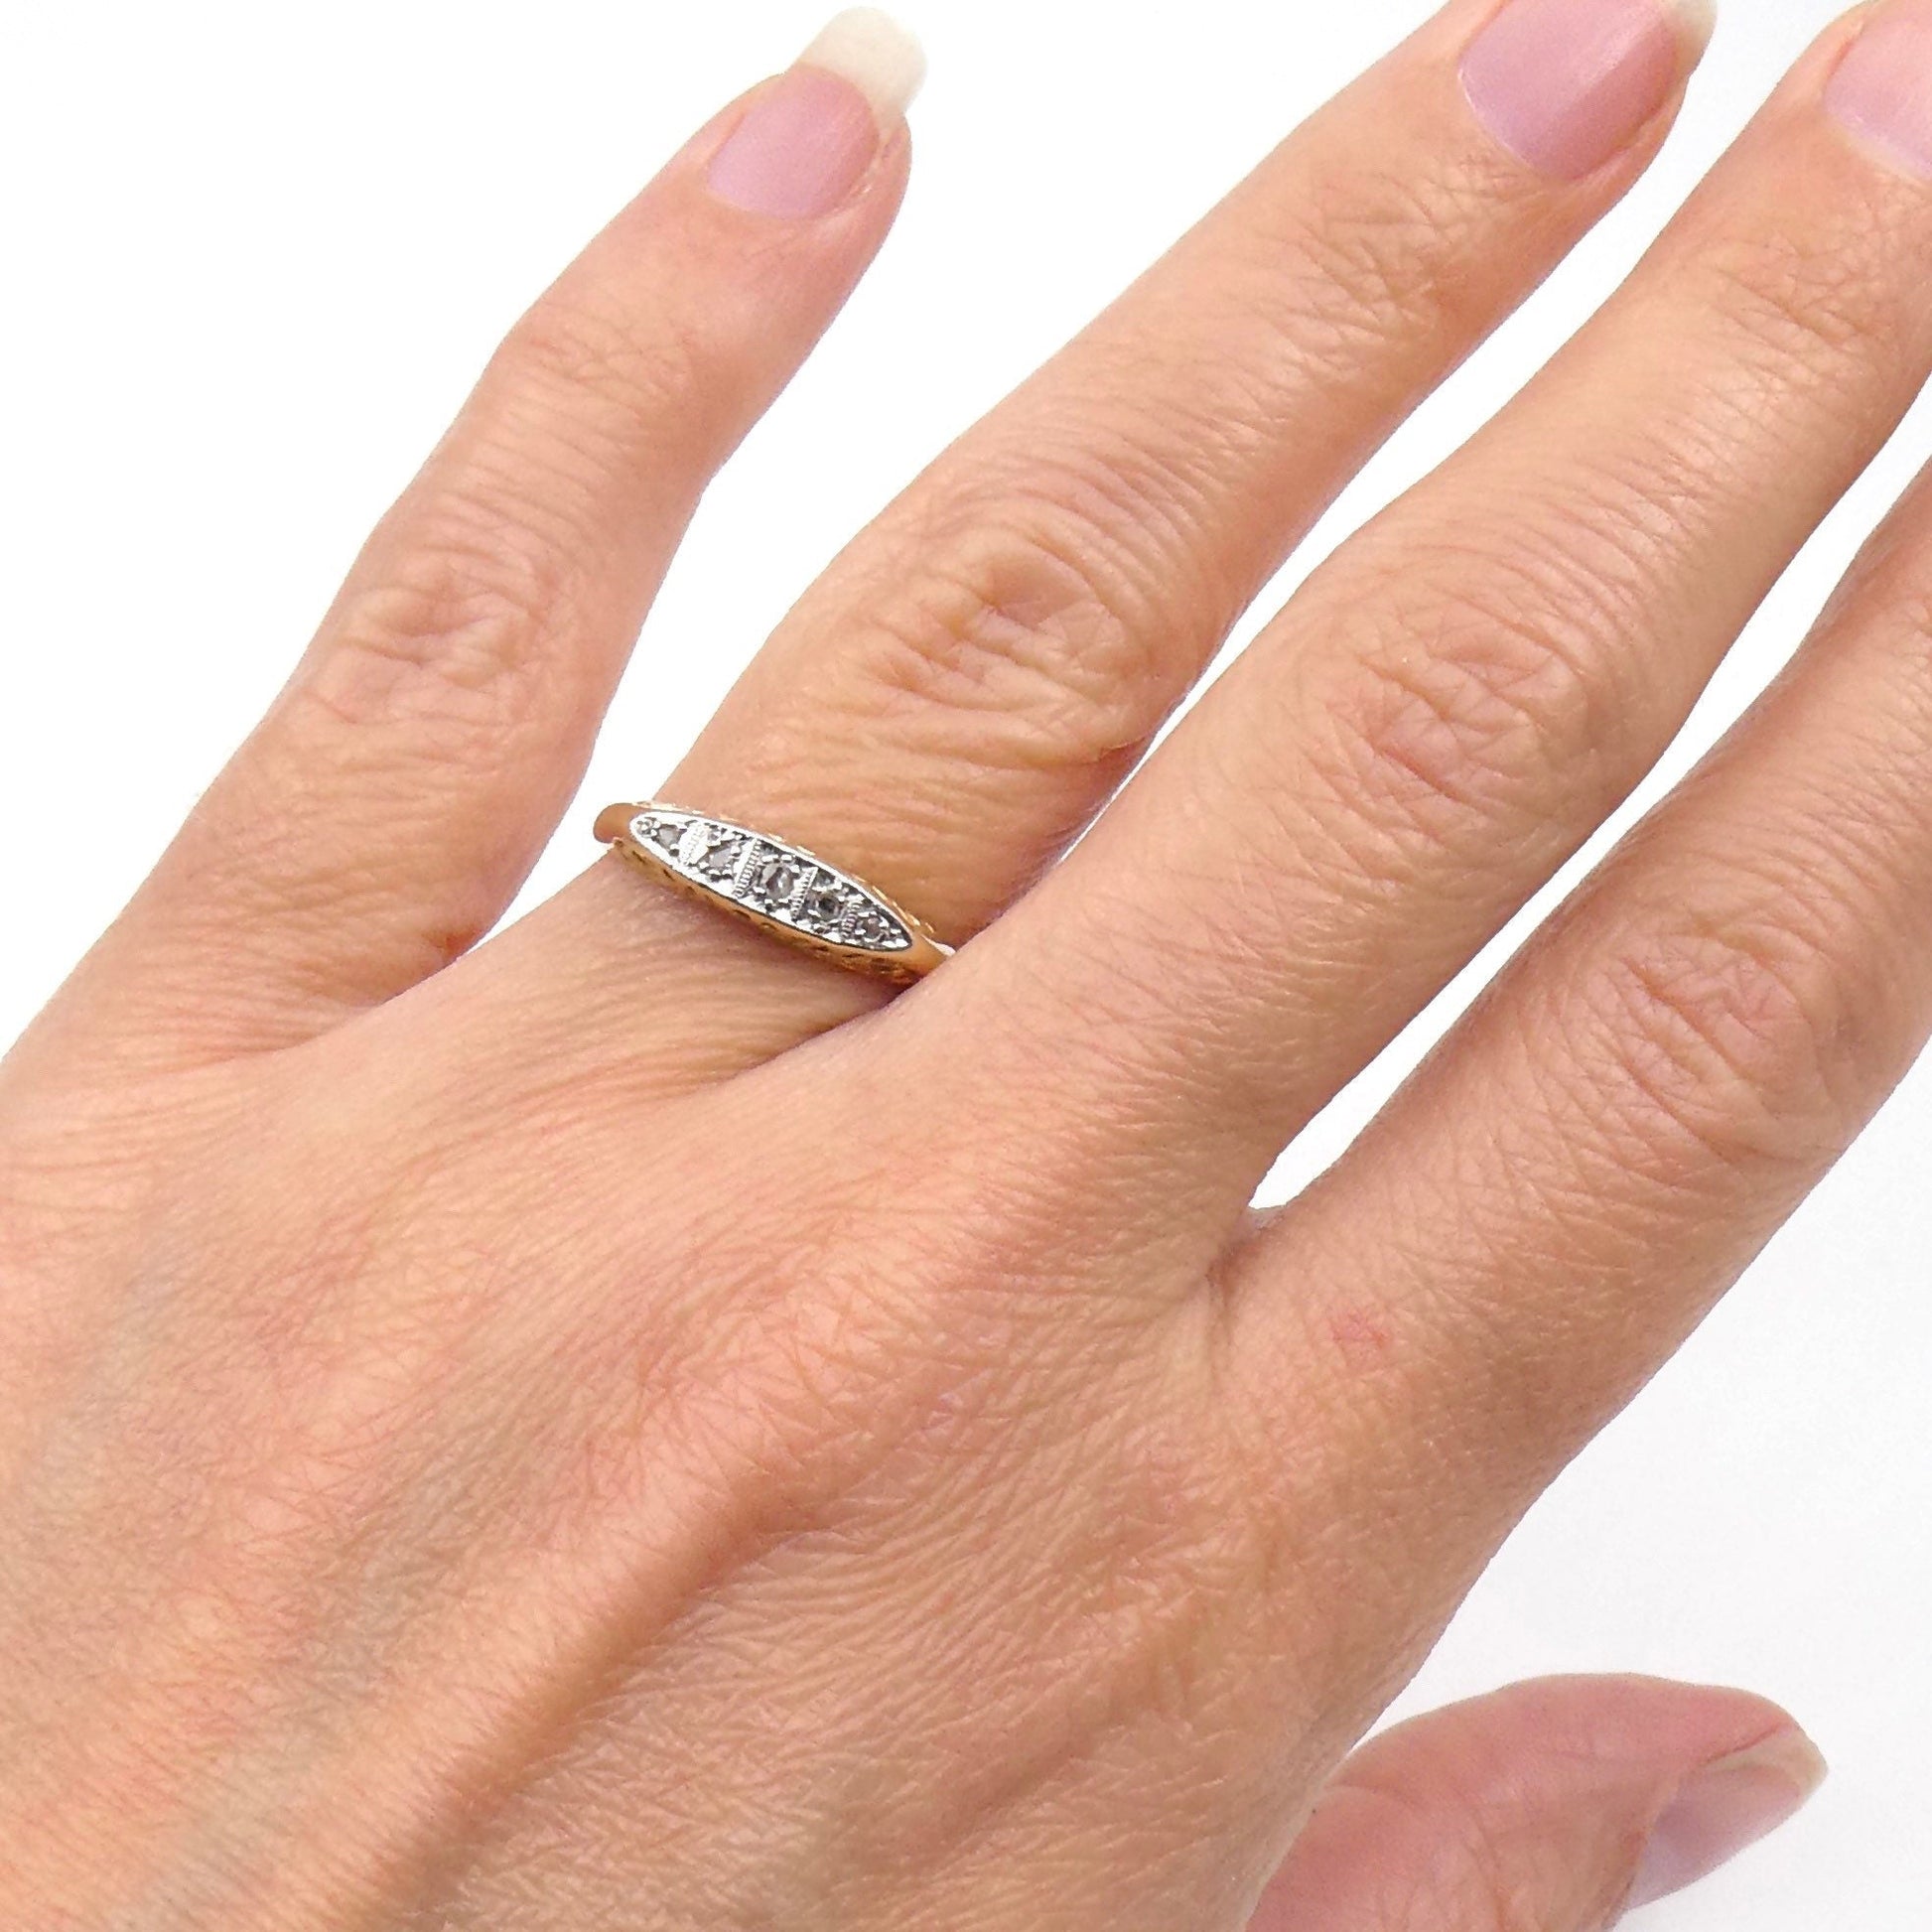 Antique five diamond ring, boat setting diamond ring, ideal stacking ring. - Collected